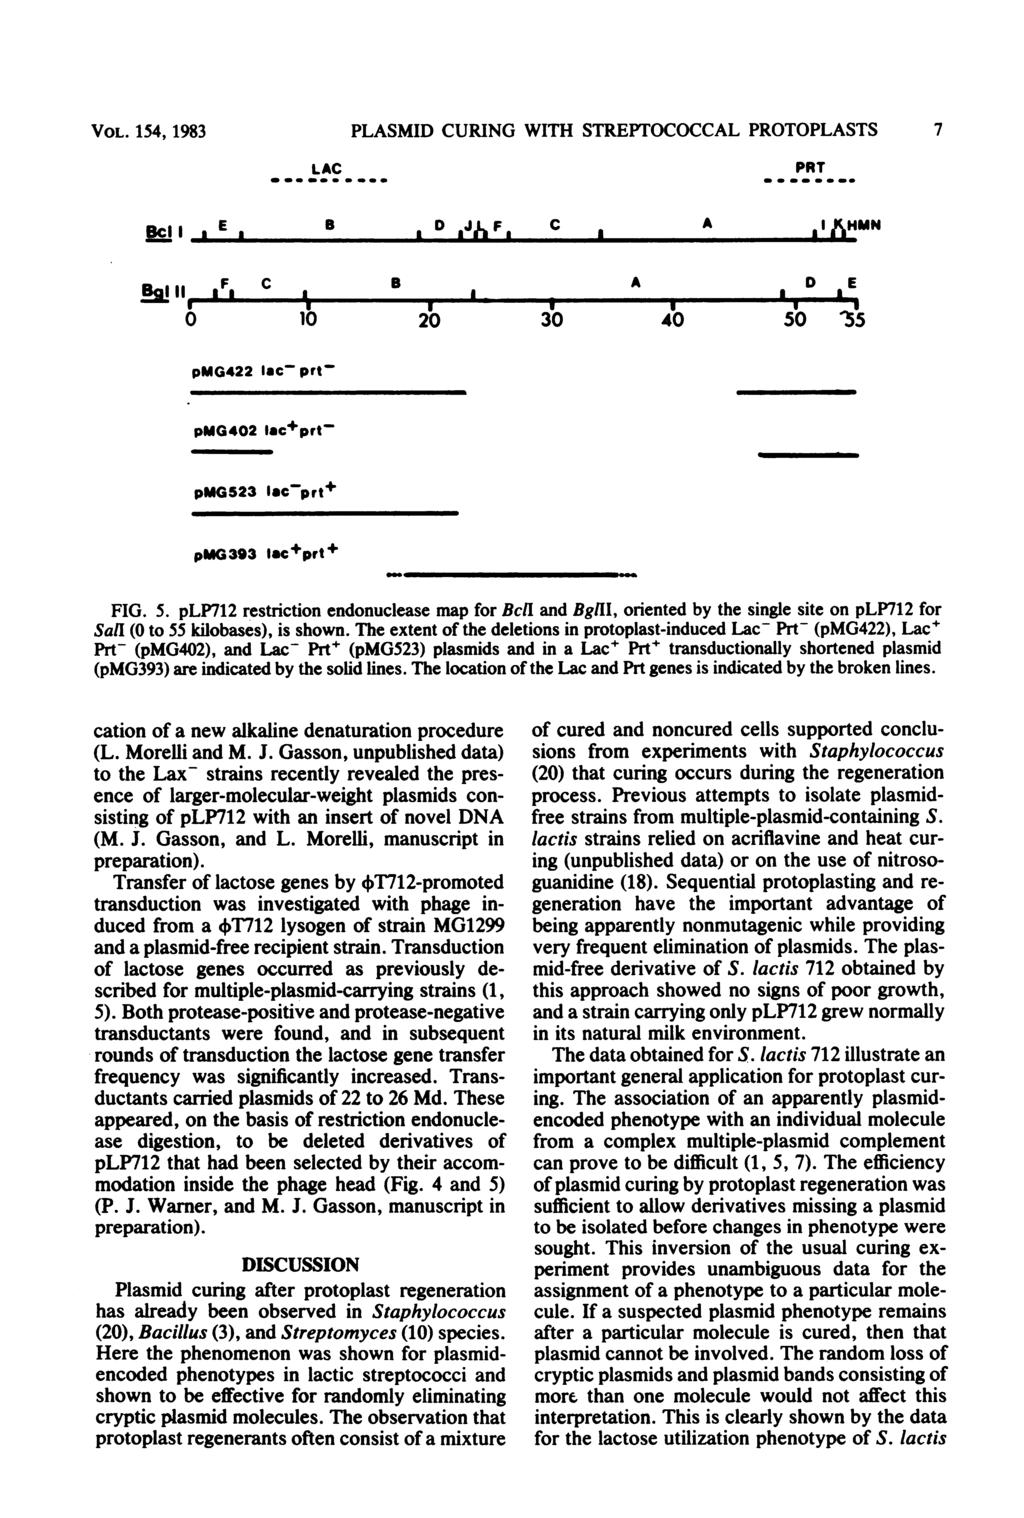 VOL. 154, 1983 LAC.w _. 4. _. a _.. PLASMID CURING WITH STREPTOCOCCAL PROTOPLASTS PRT _.